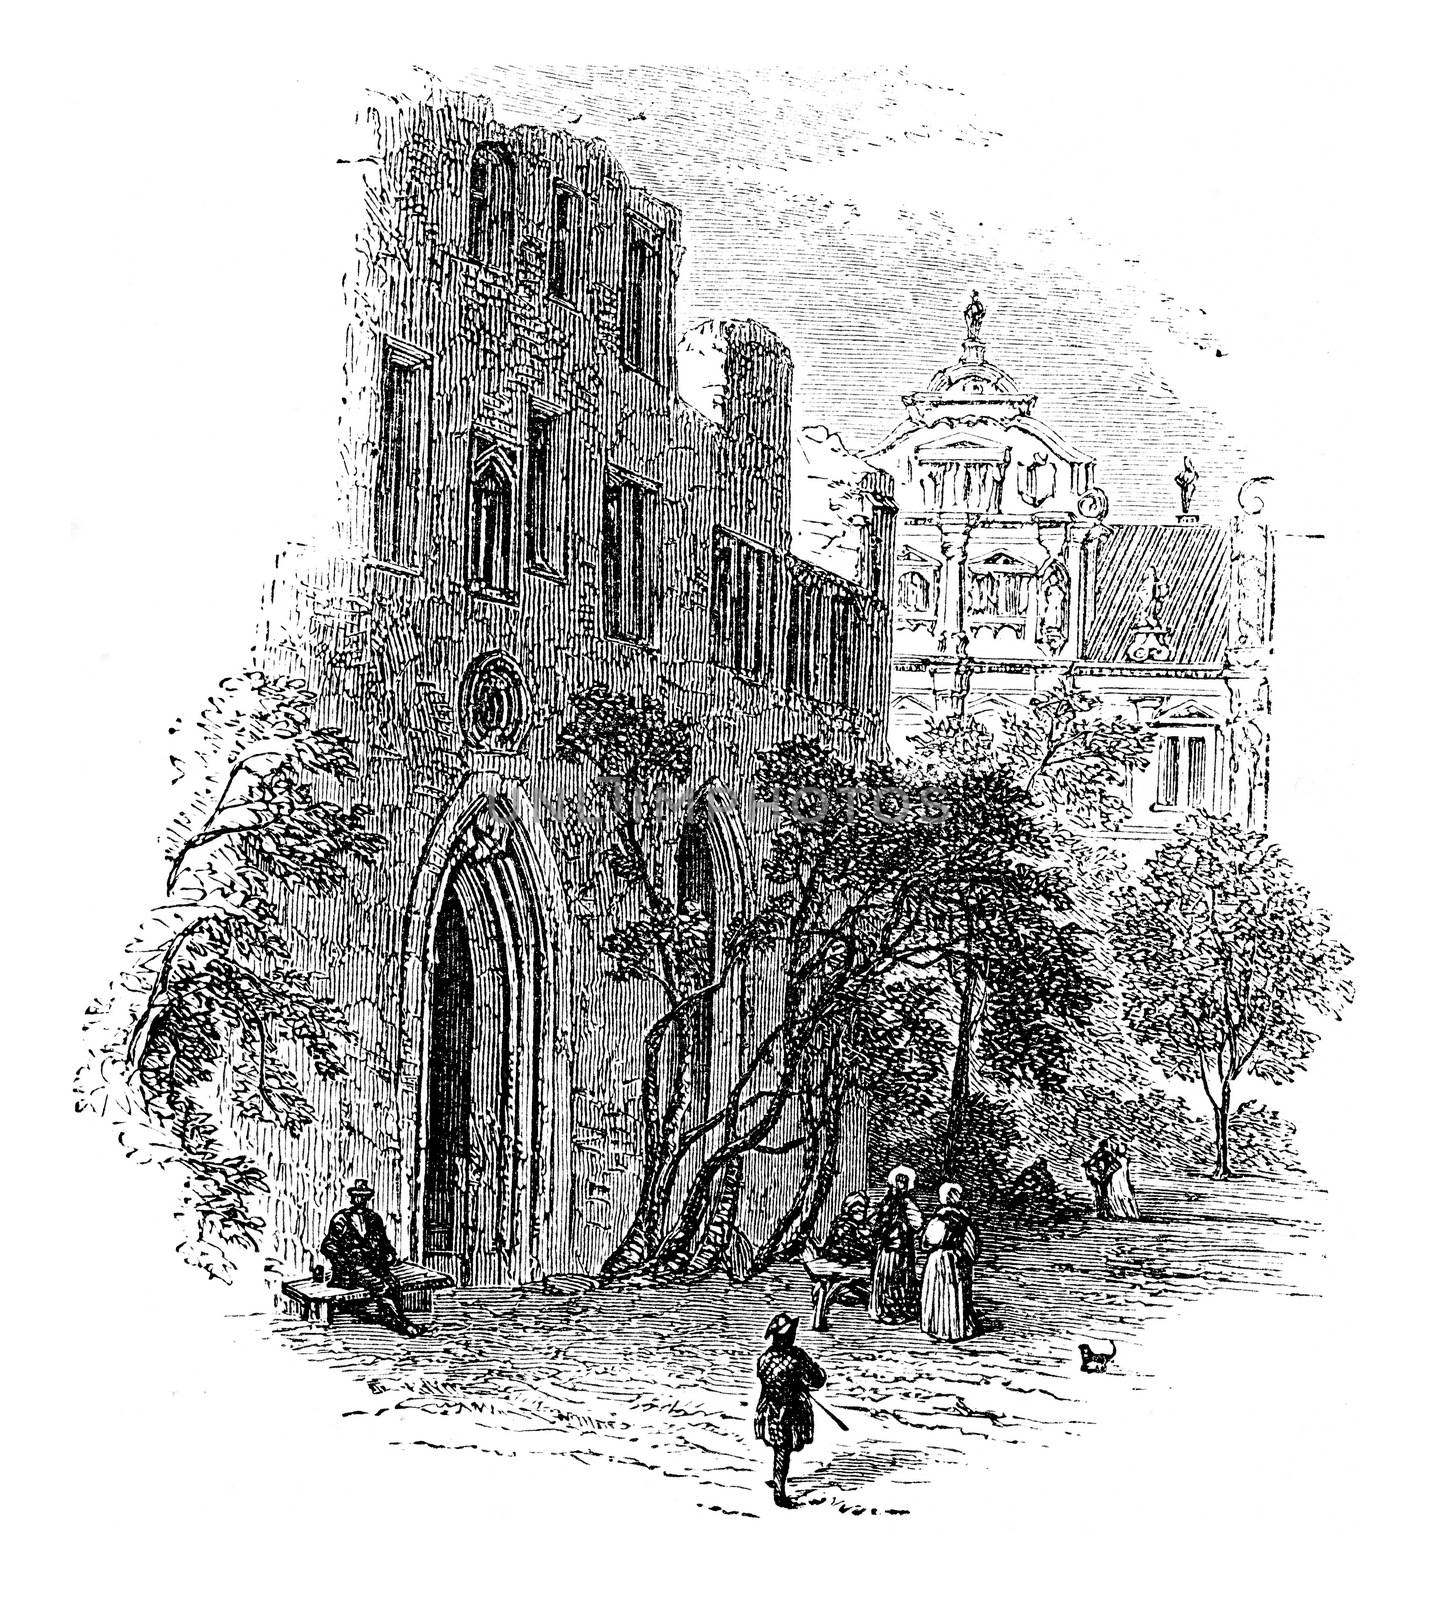 Tower Ruprecht, vintage engraved illustration. From Chemin des Ecoliers, 1861.
